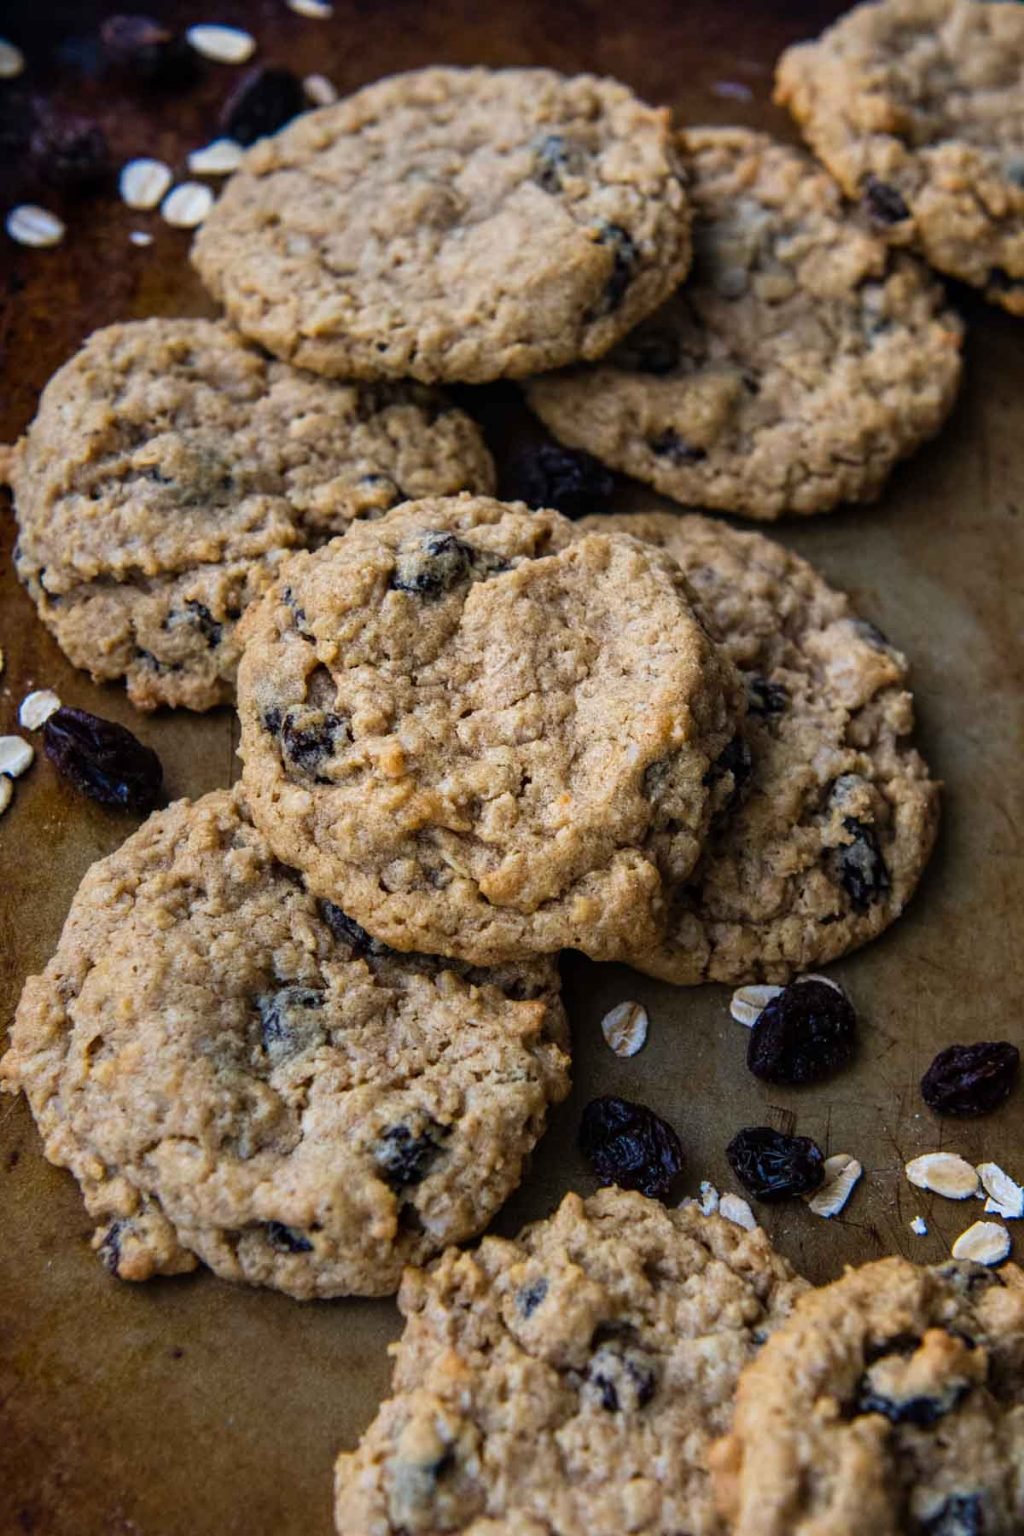 a close up of a gluten-free oatmeal raisin cookies with other cookies underneath it